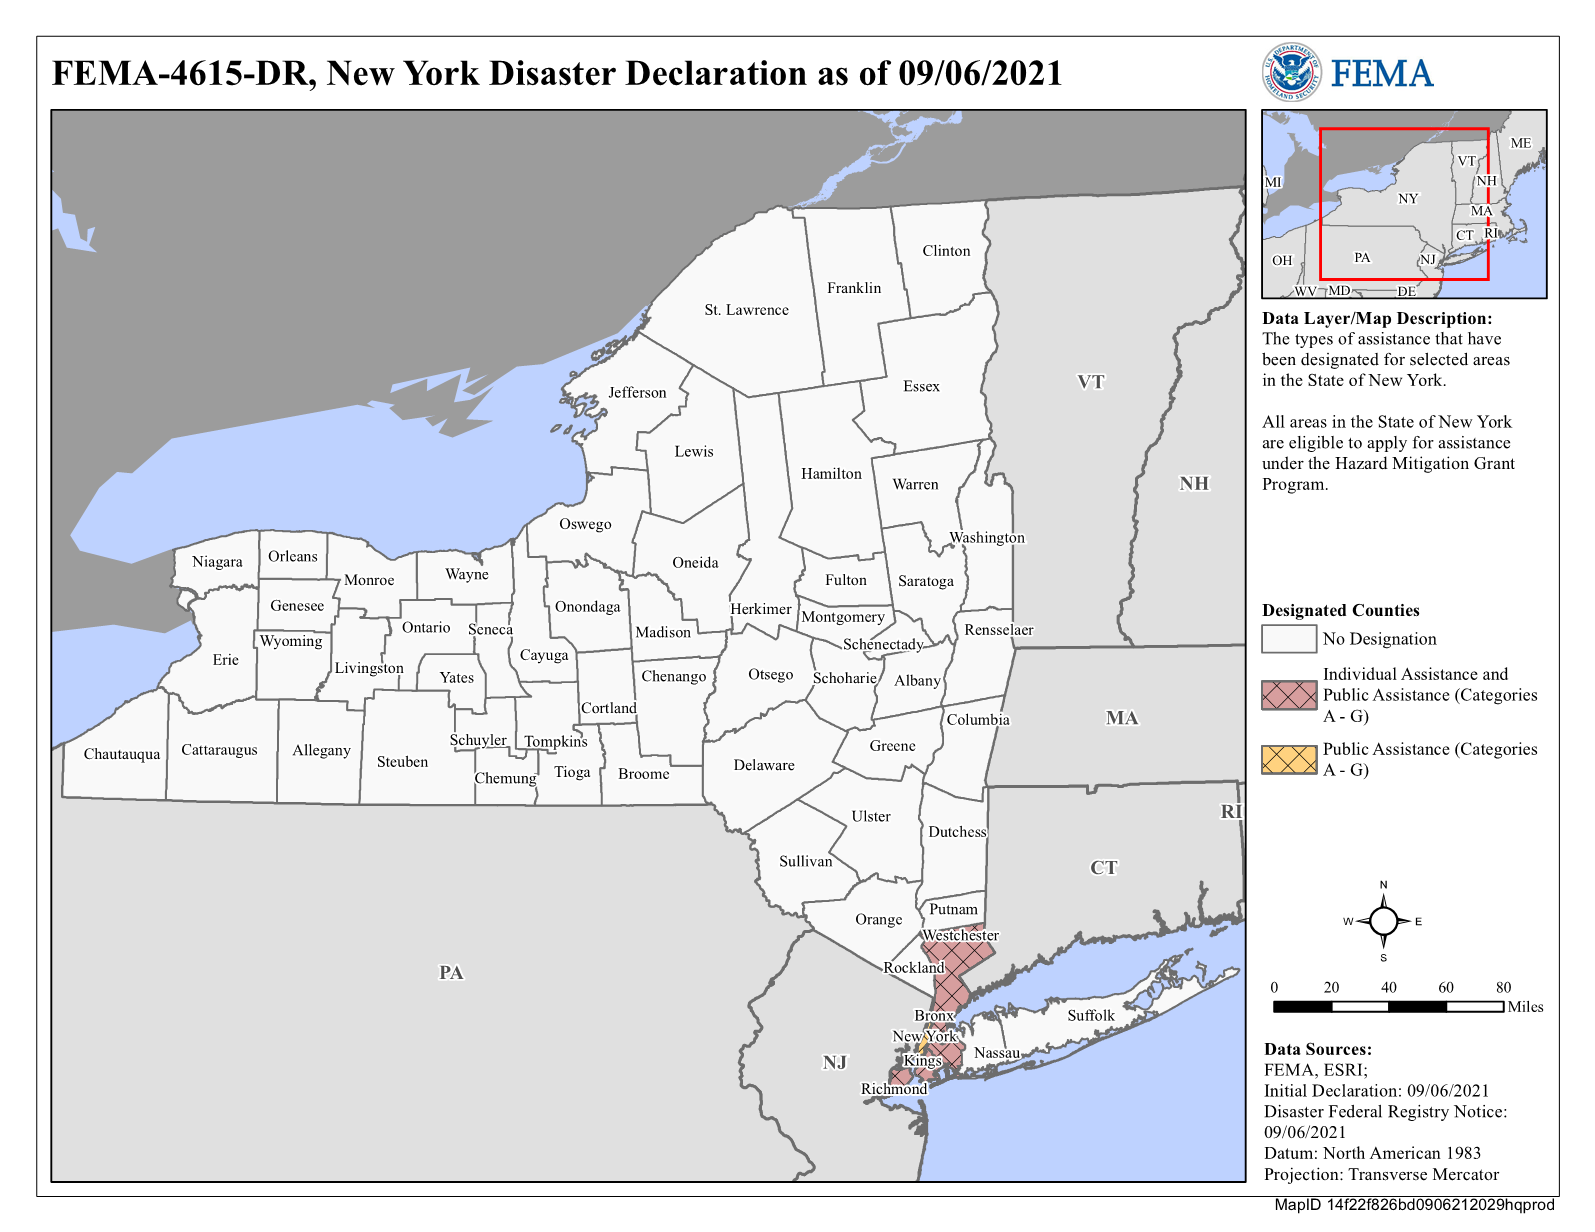 DR4615 NY Declared Counties